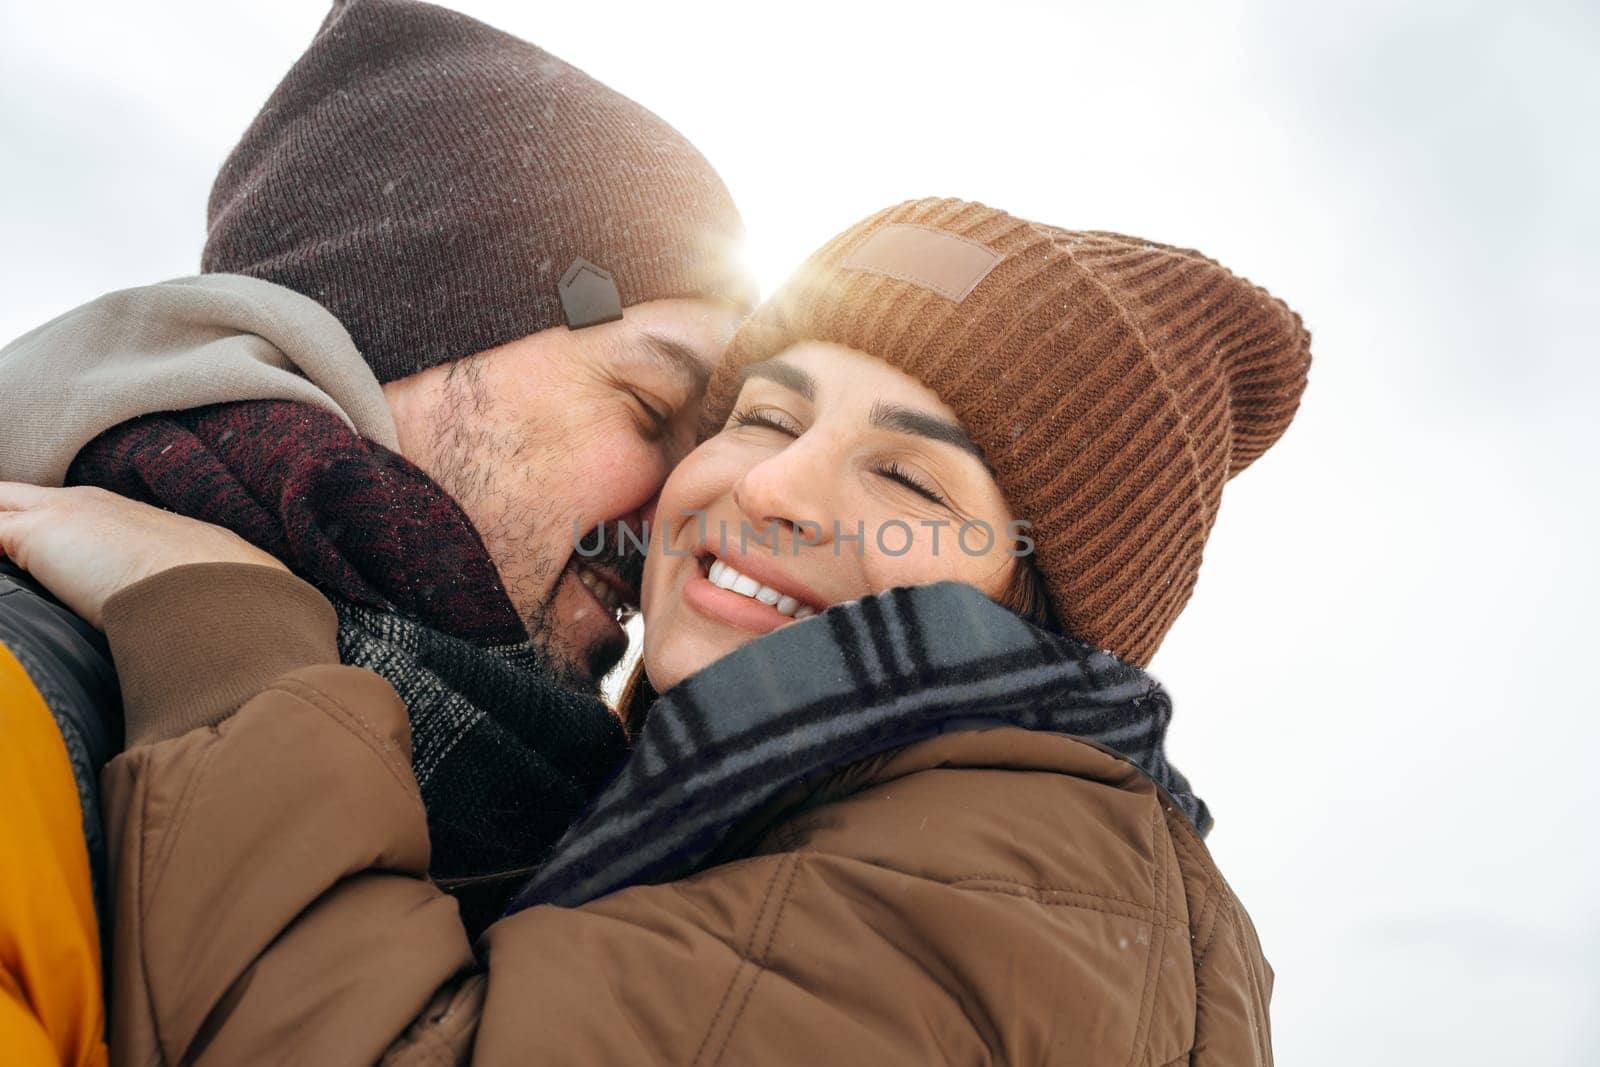 Young couple in love outdoor in snowy winter forest having a walk